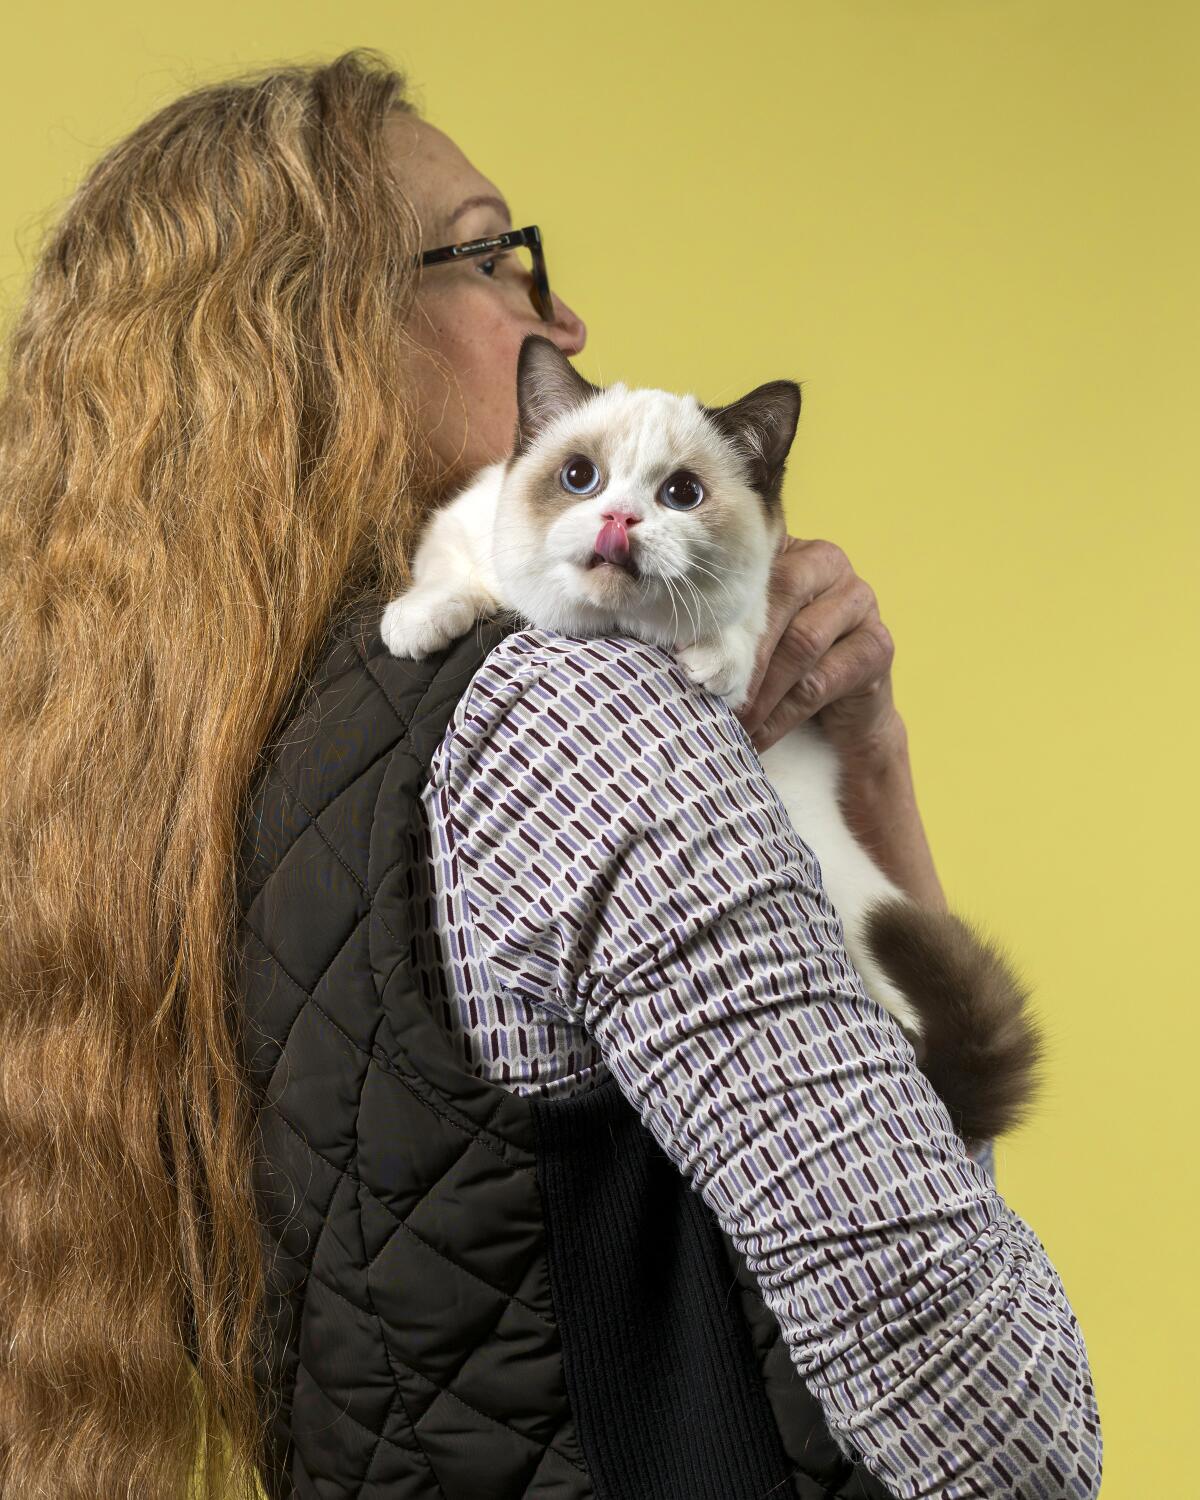 Honey Bunny, a Minuet cat, looks over Karolyn McCall's shoulder with its tongue touching its nose.